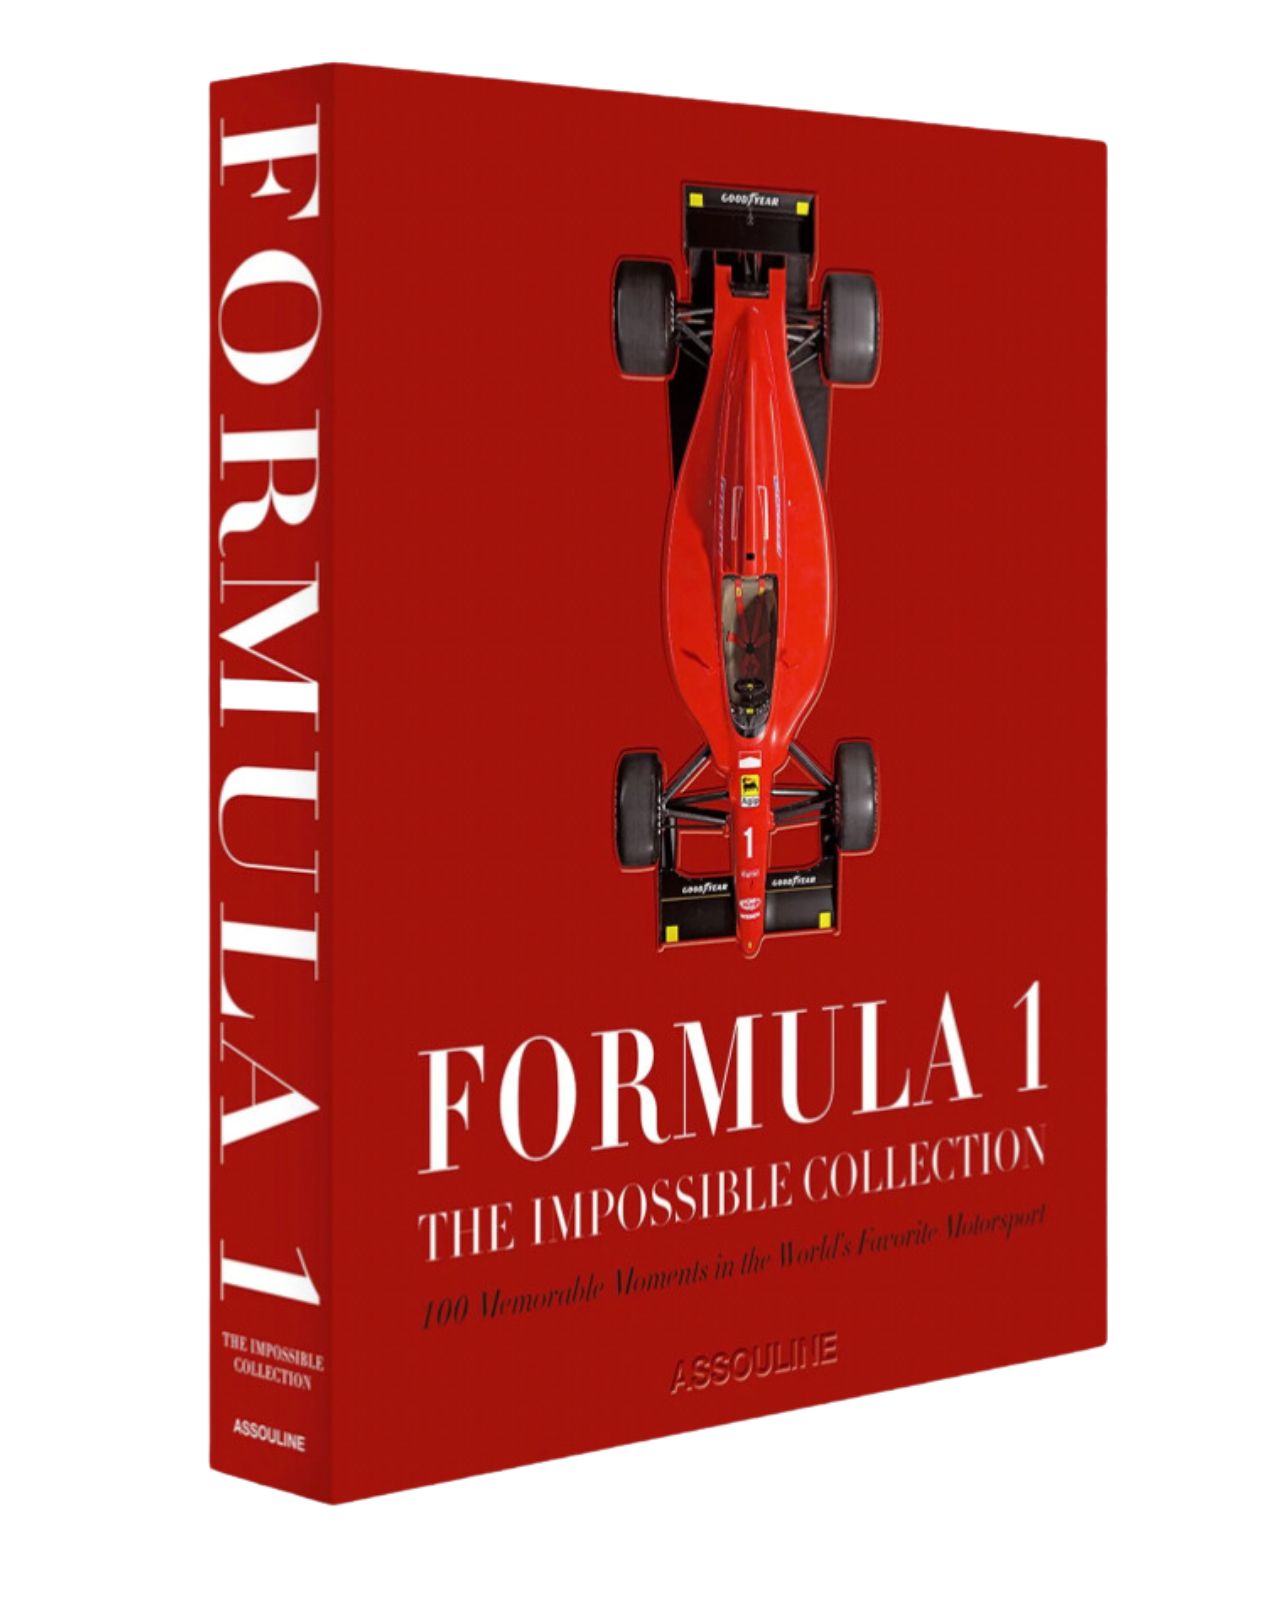 Assouline’s special edition book, Formula 1: The Impossible collection